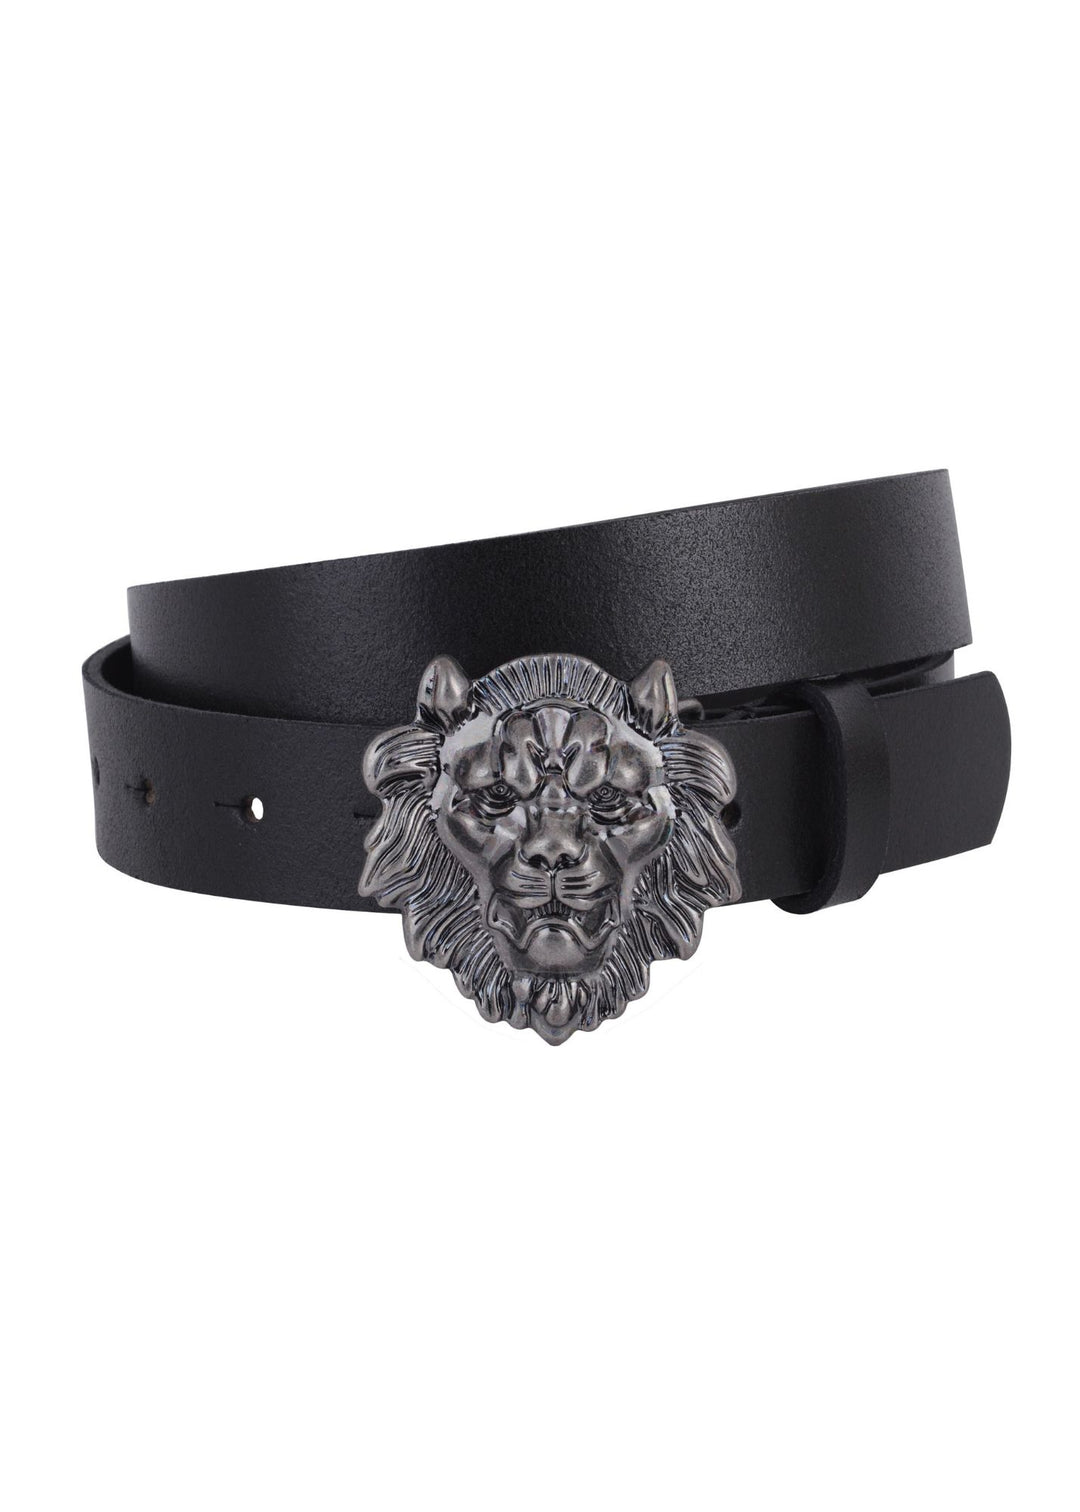 Most Wanted Lion Buckle Leather Belt (Black)